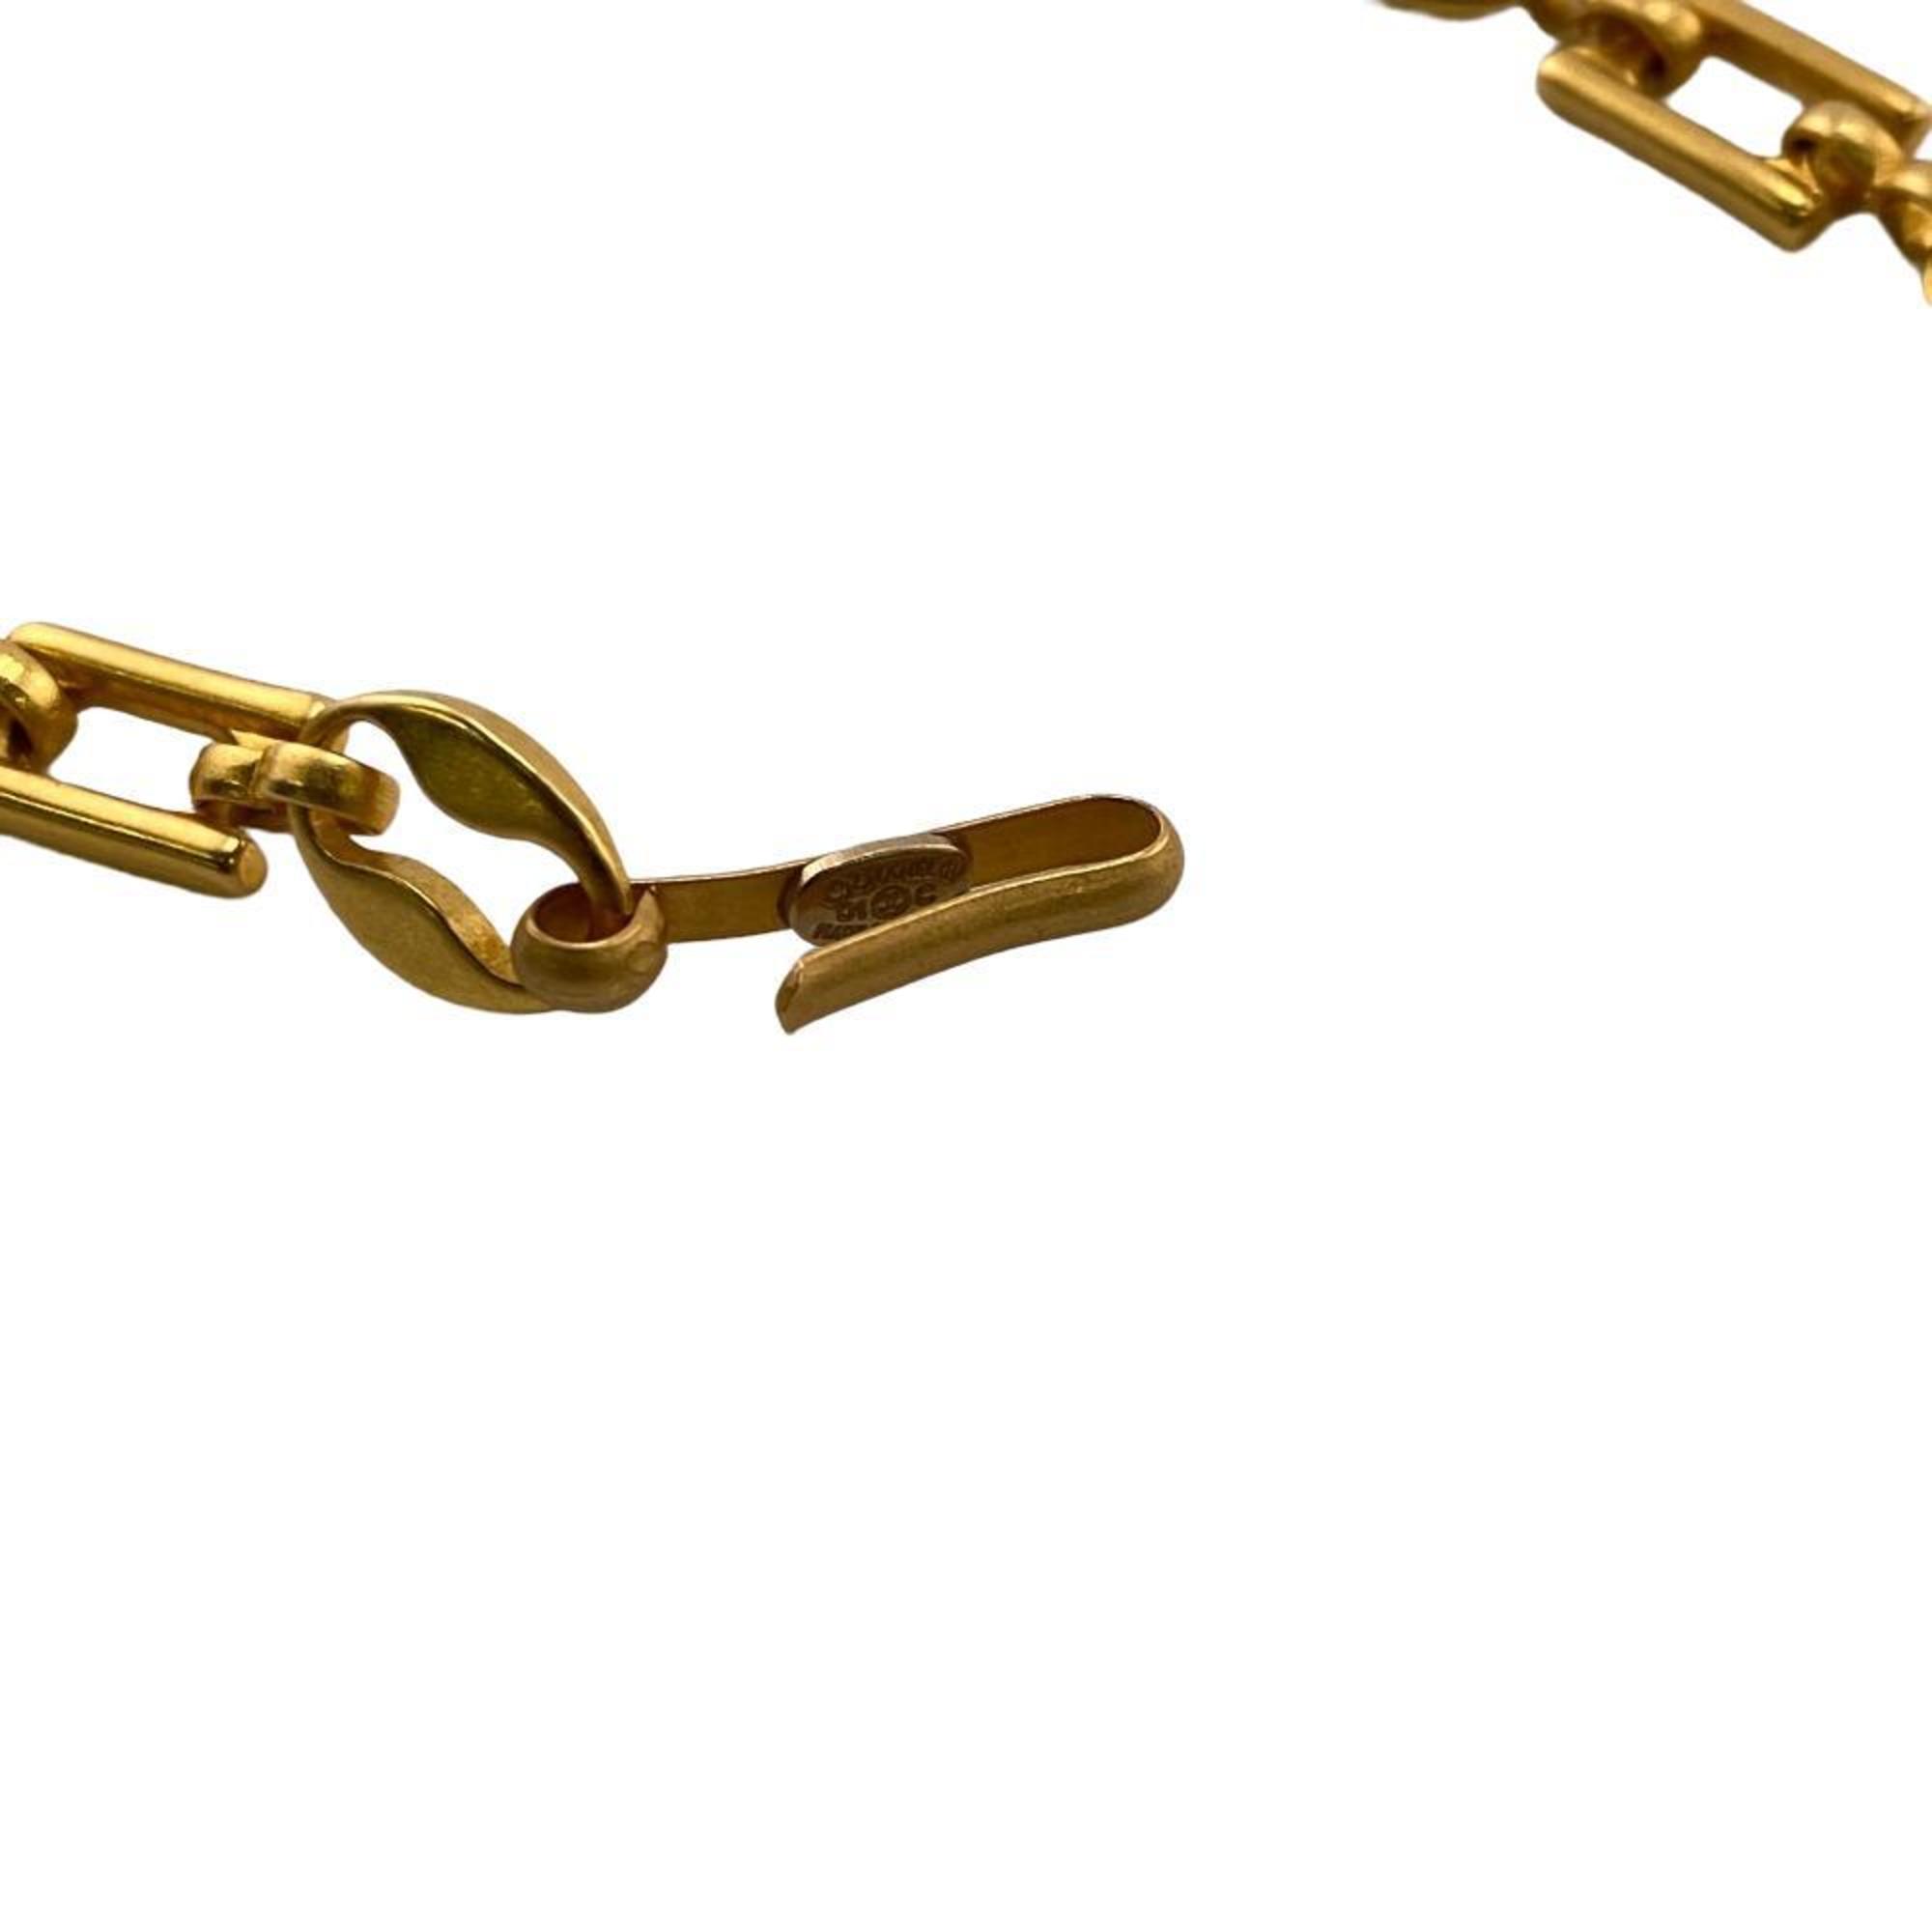 CHANEL Chanel 01C Flower Necklace Gold Women's